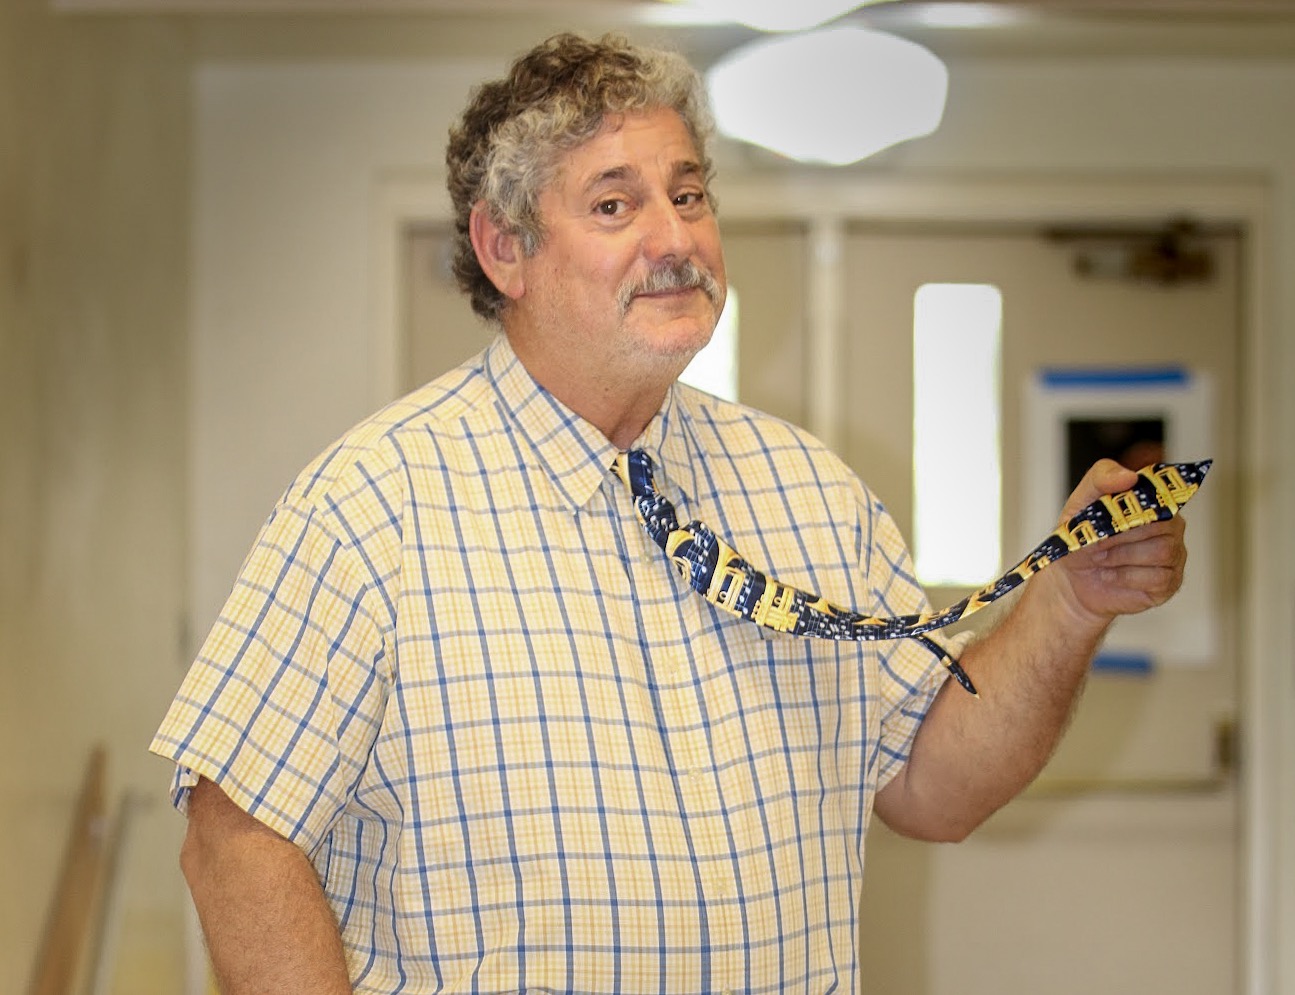 Known for his quirky ties, assistant principal George Miller holds one adorned with trumpets and music notes, just one of many of his musical ties. Over the past several years, Mr. Miller has been giving his eccentric ties away to students who compliment them. “I think the kids appreciate it when I give them one of my ties,” Mr. Miller said. “If a kid likes it and you give it to them, they’re happy.”